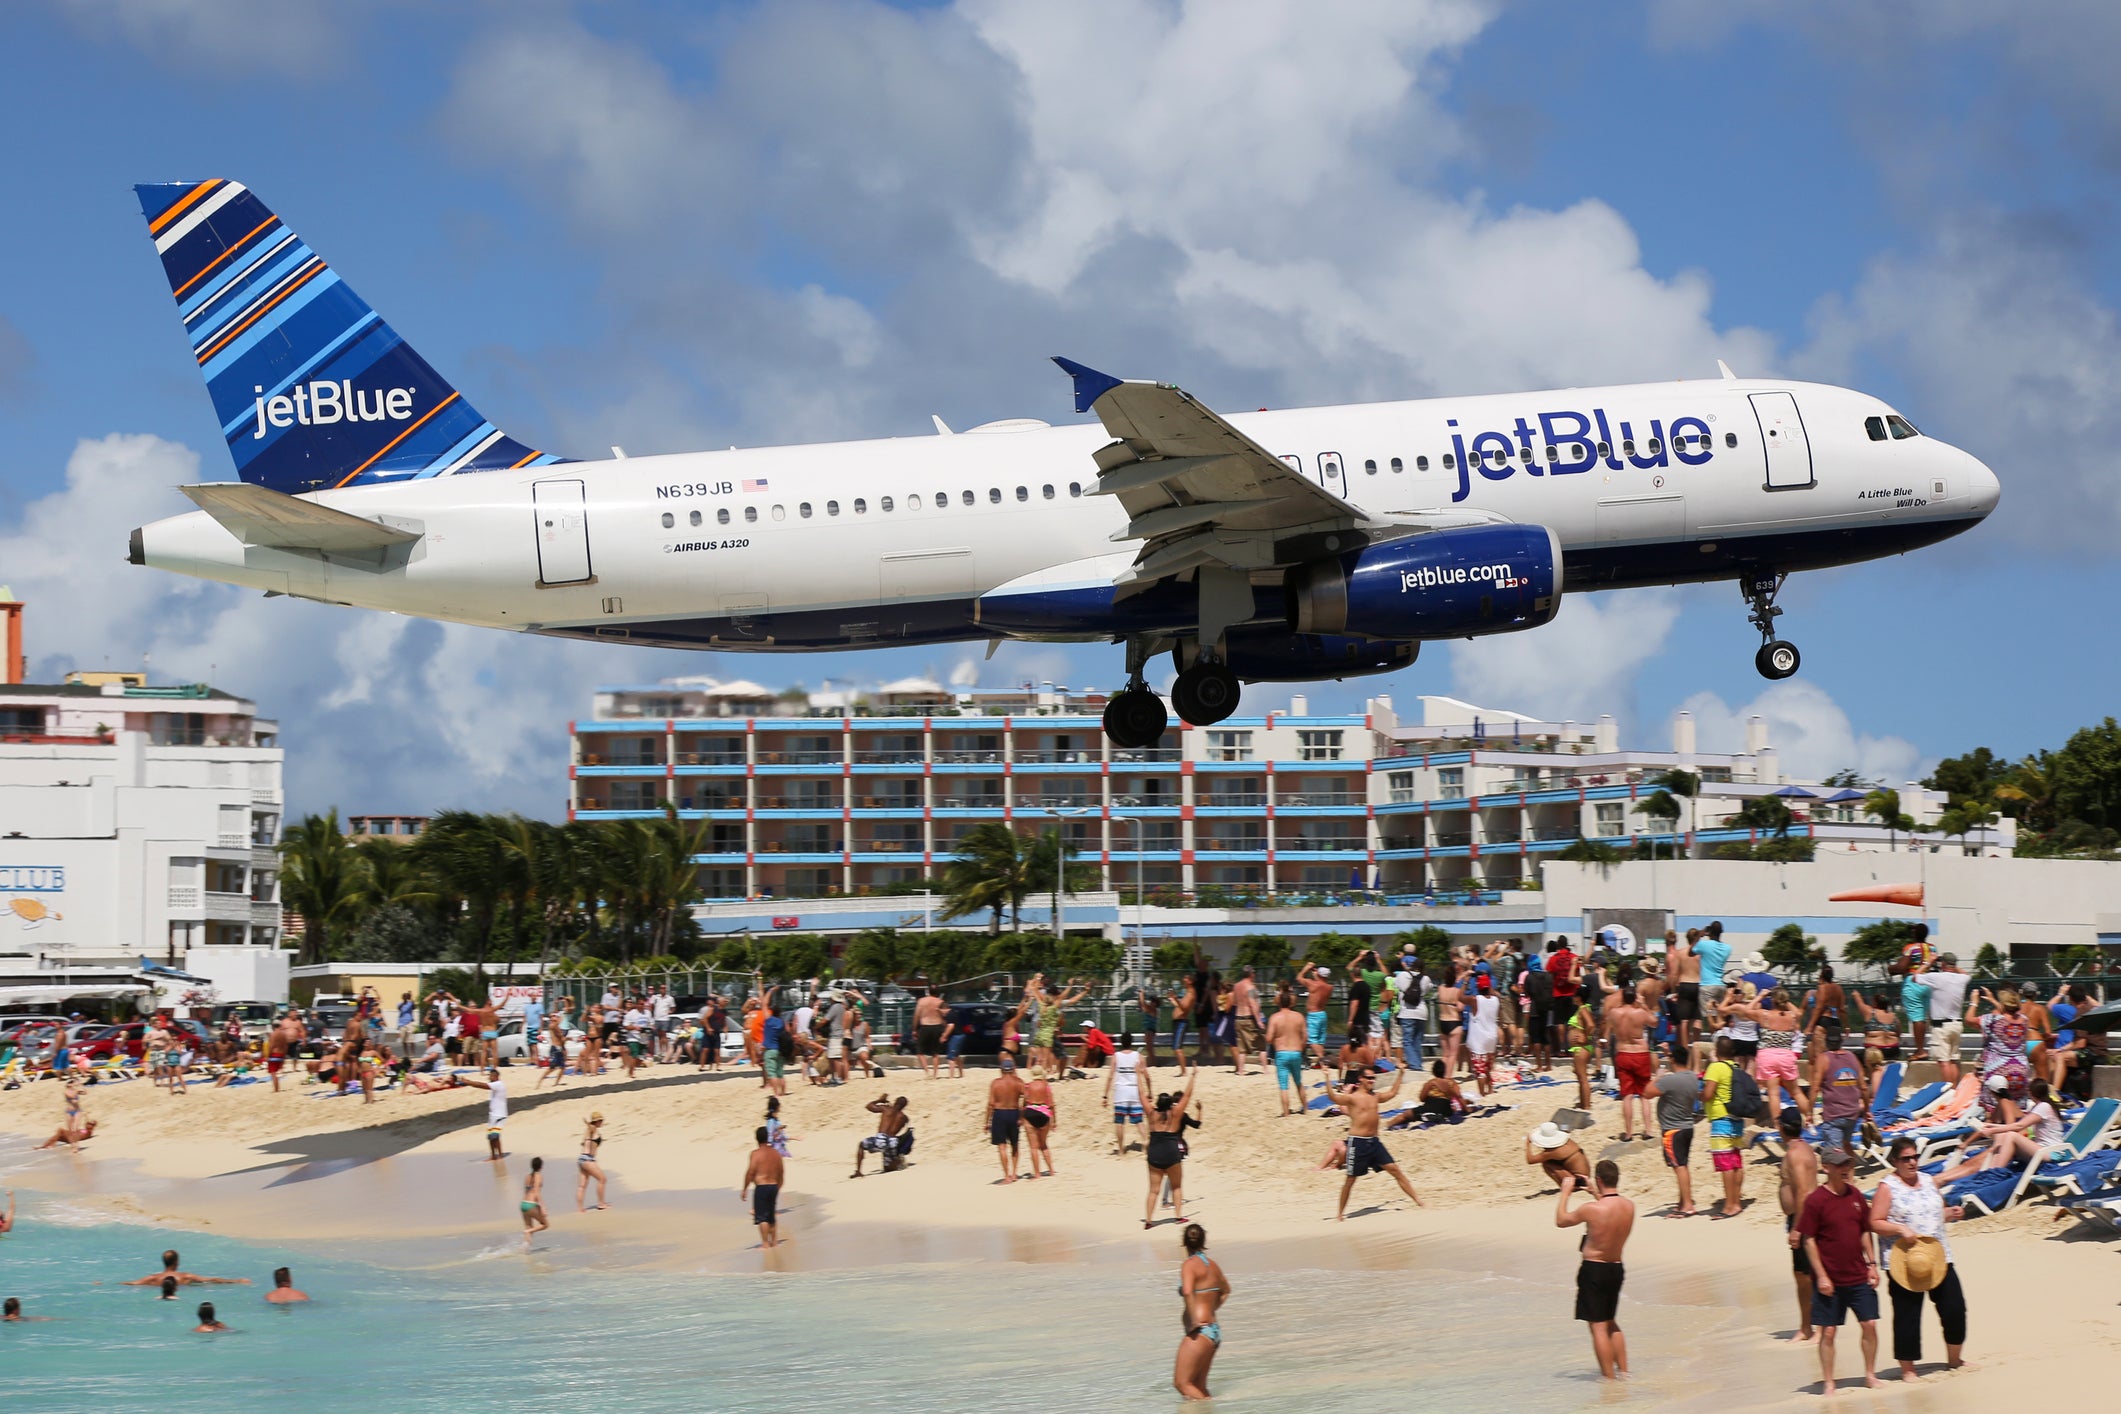 Spend over $2,000 on jetBlue for $129 off your holiday